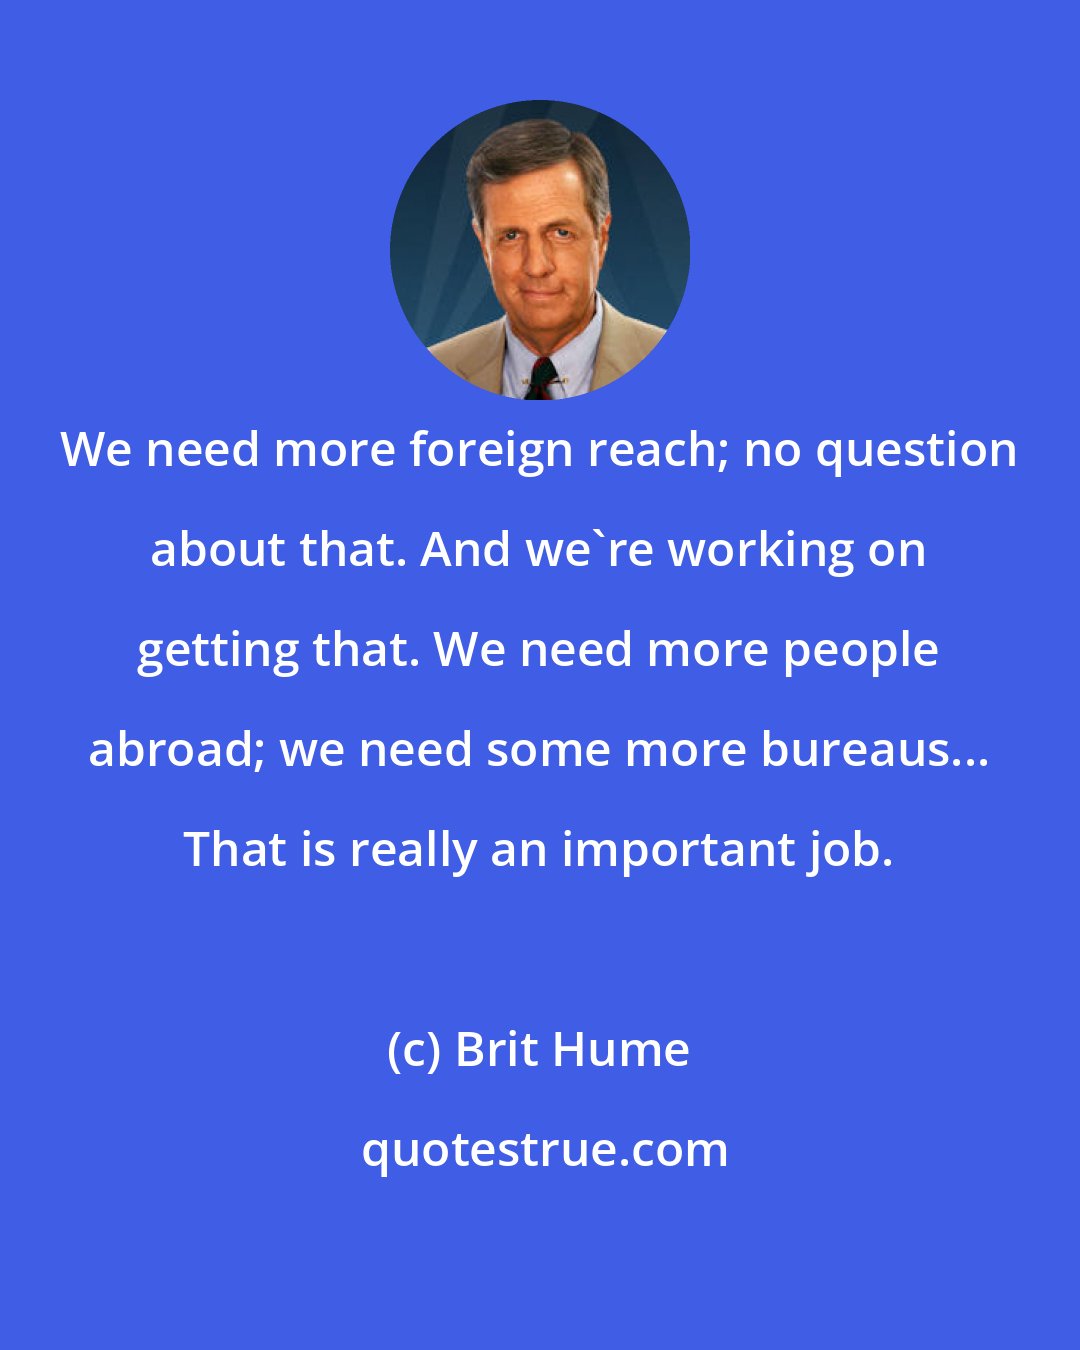 Brit Hume: We need more foreign reach; no question about that. And we're working on getting that. We need more people abroad; we need some more bureaus... That is really an important job.